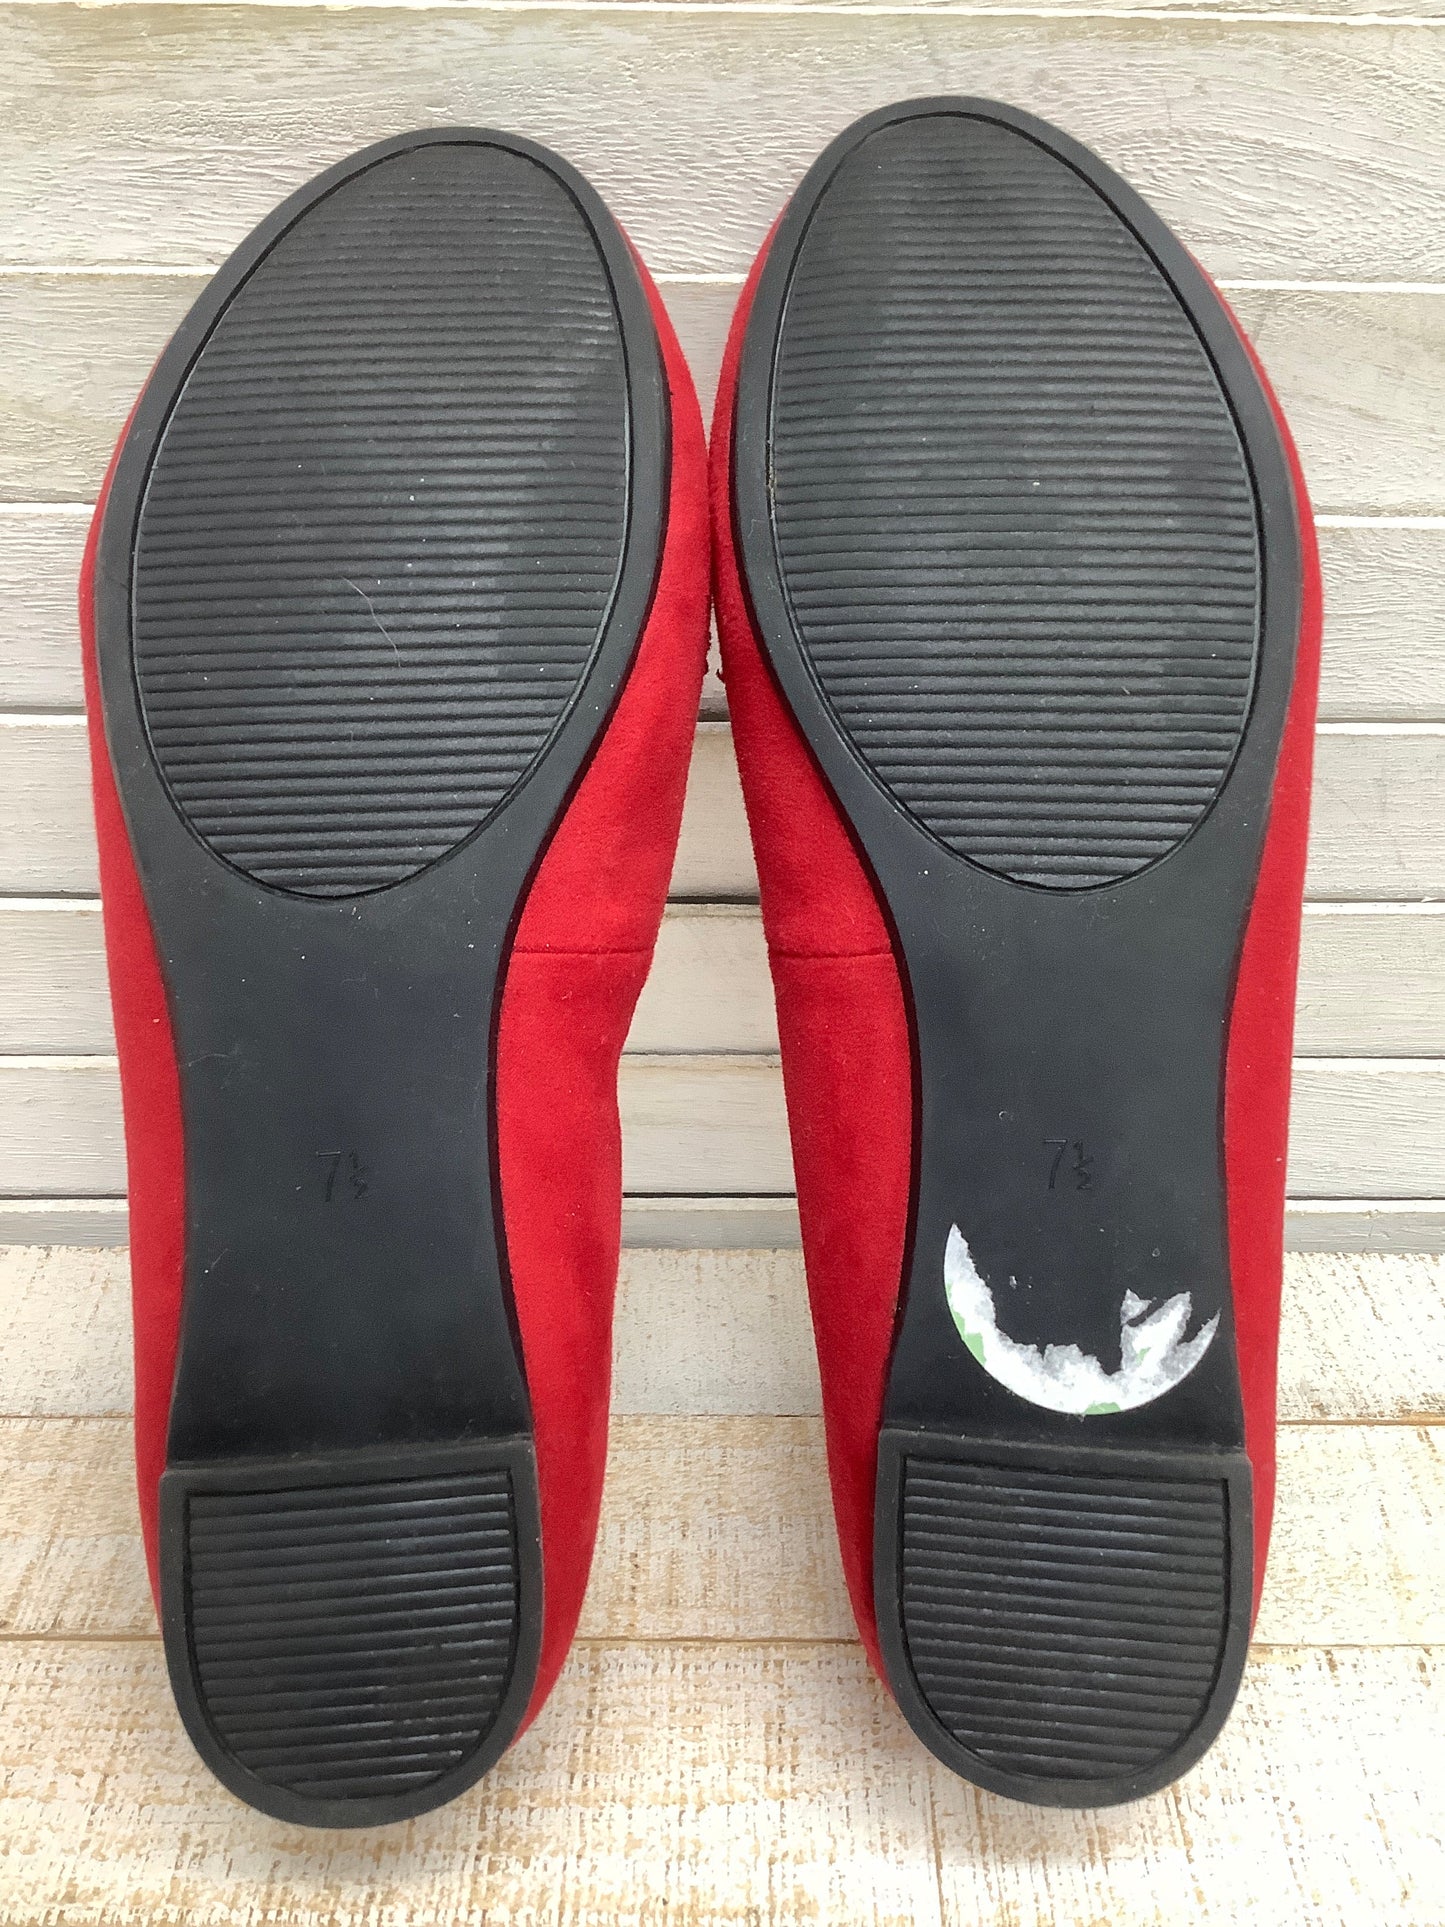 Red Shoes Flats Coach, Size 7.5